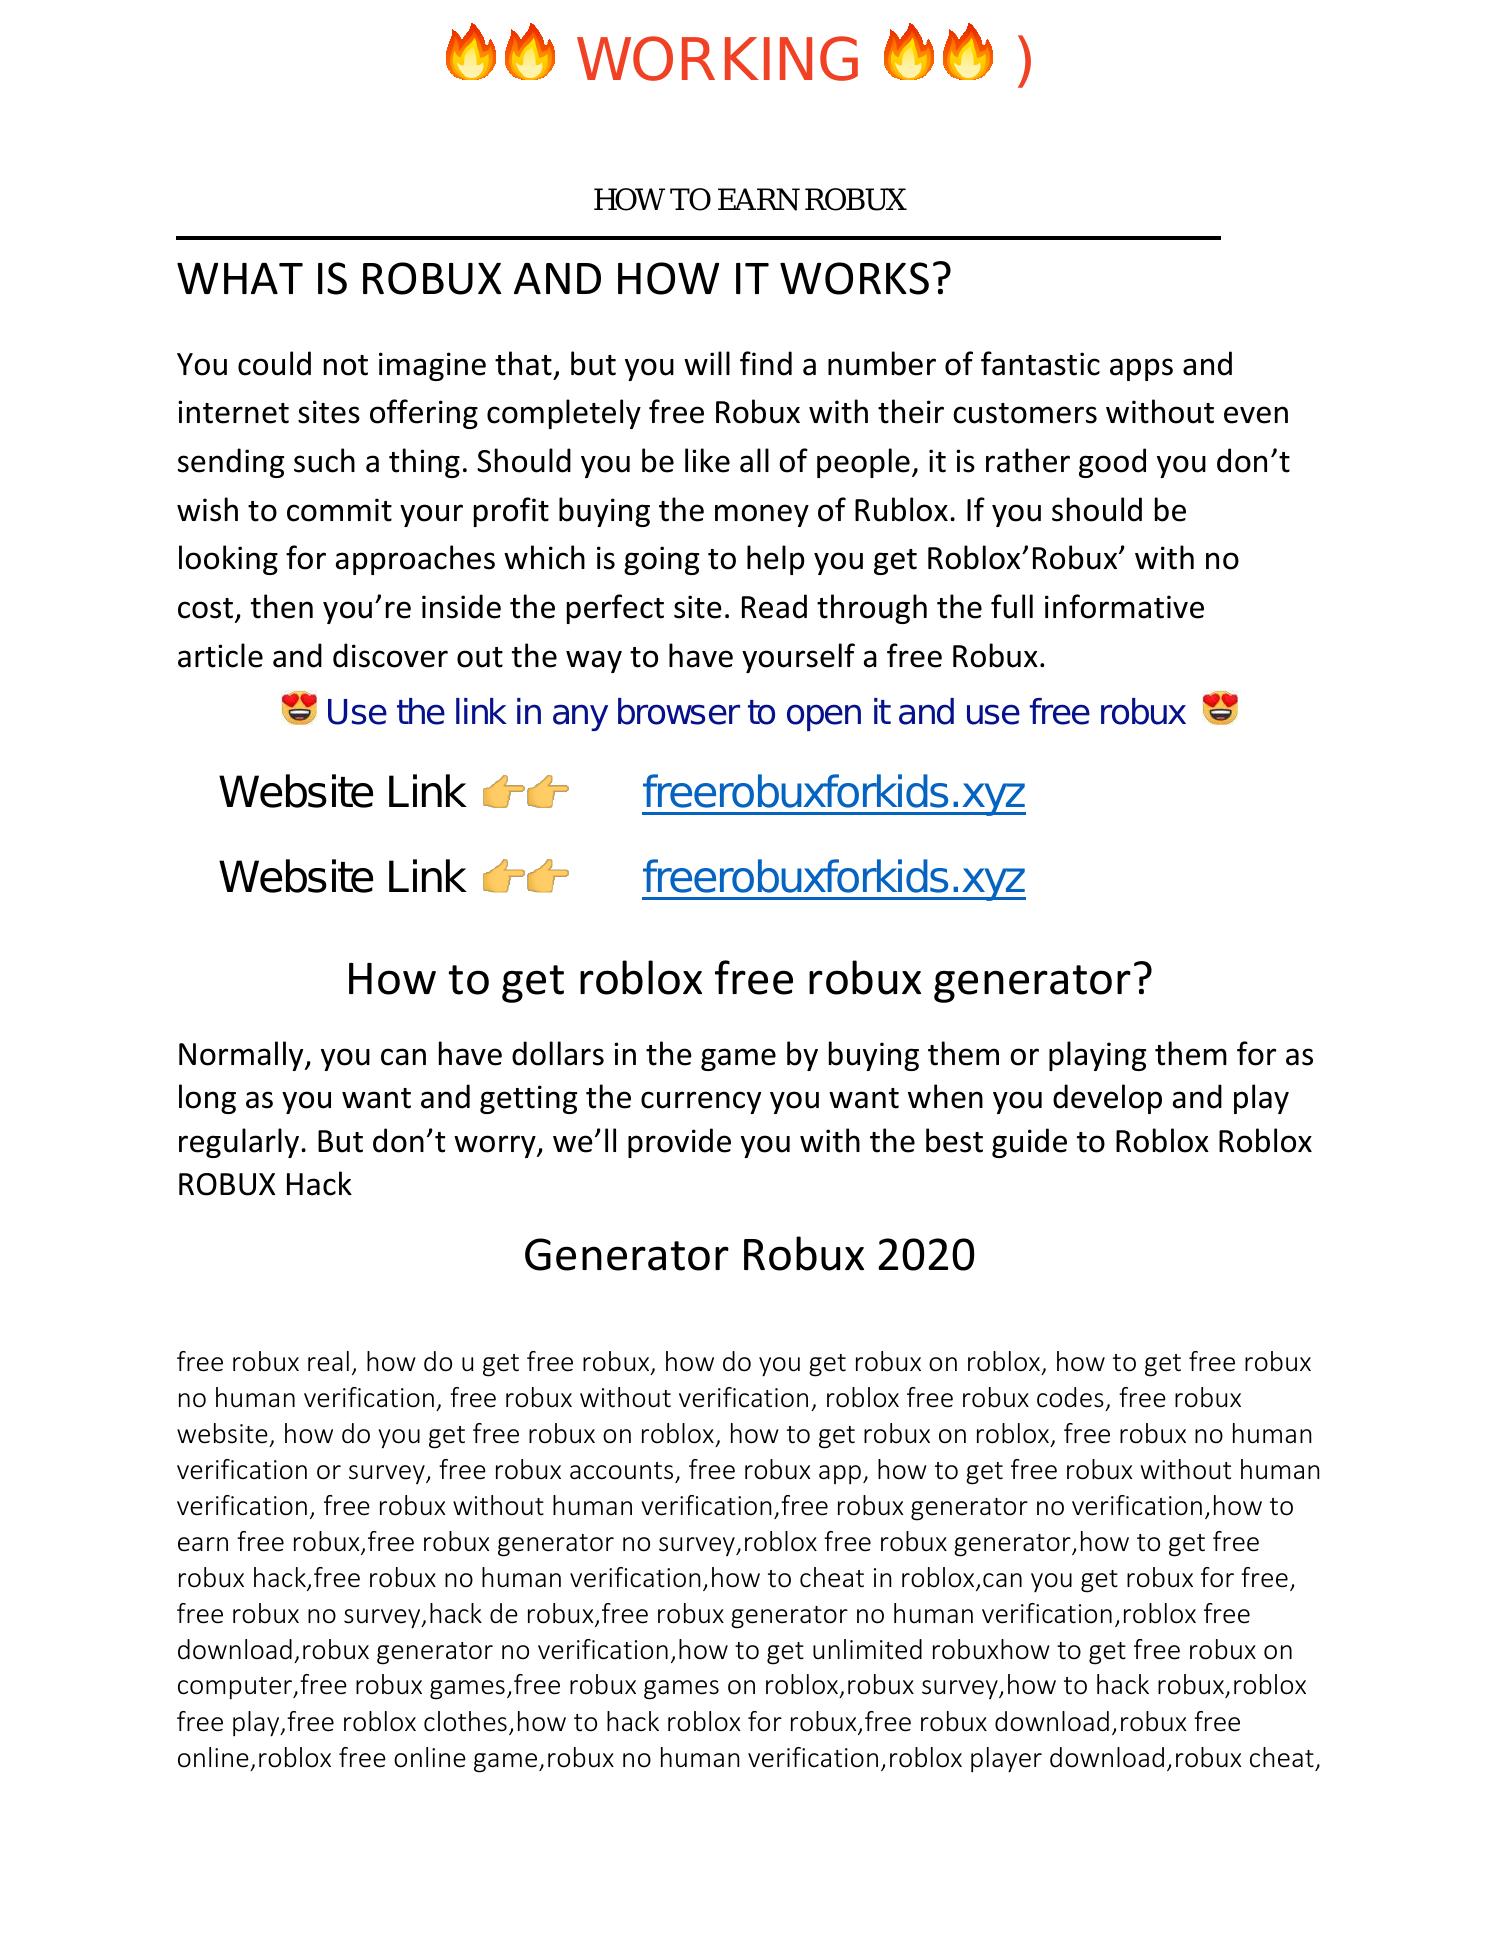 Robux Hack For Roblox That Works